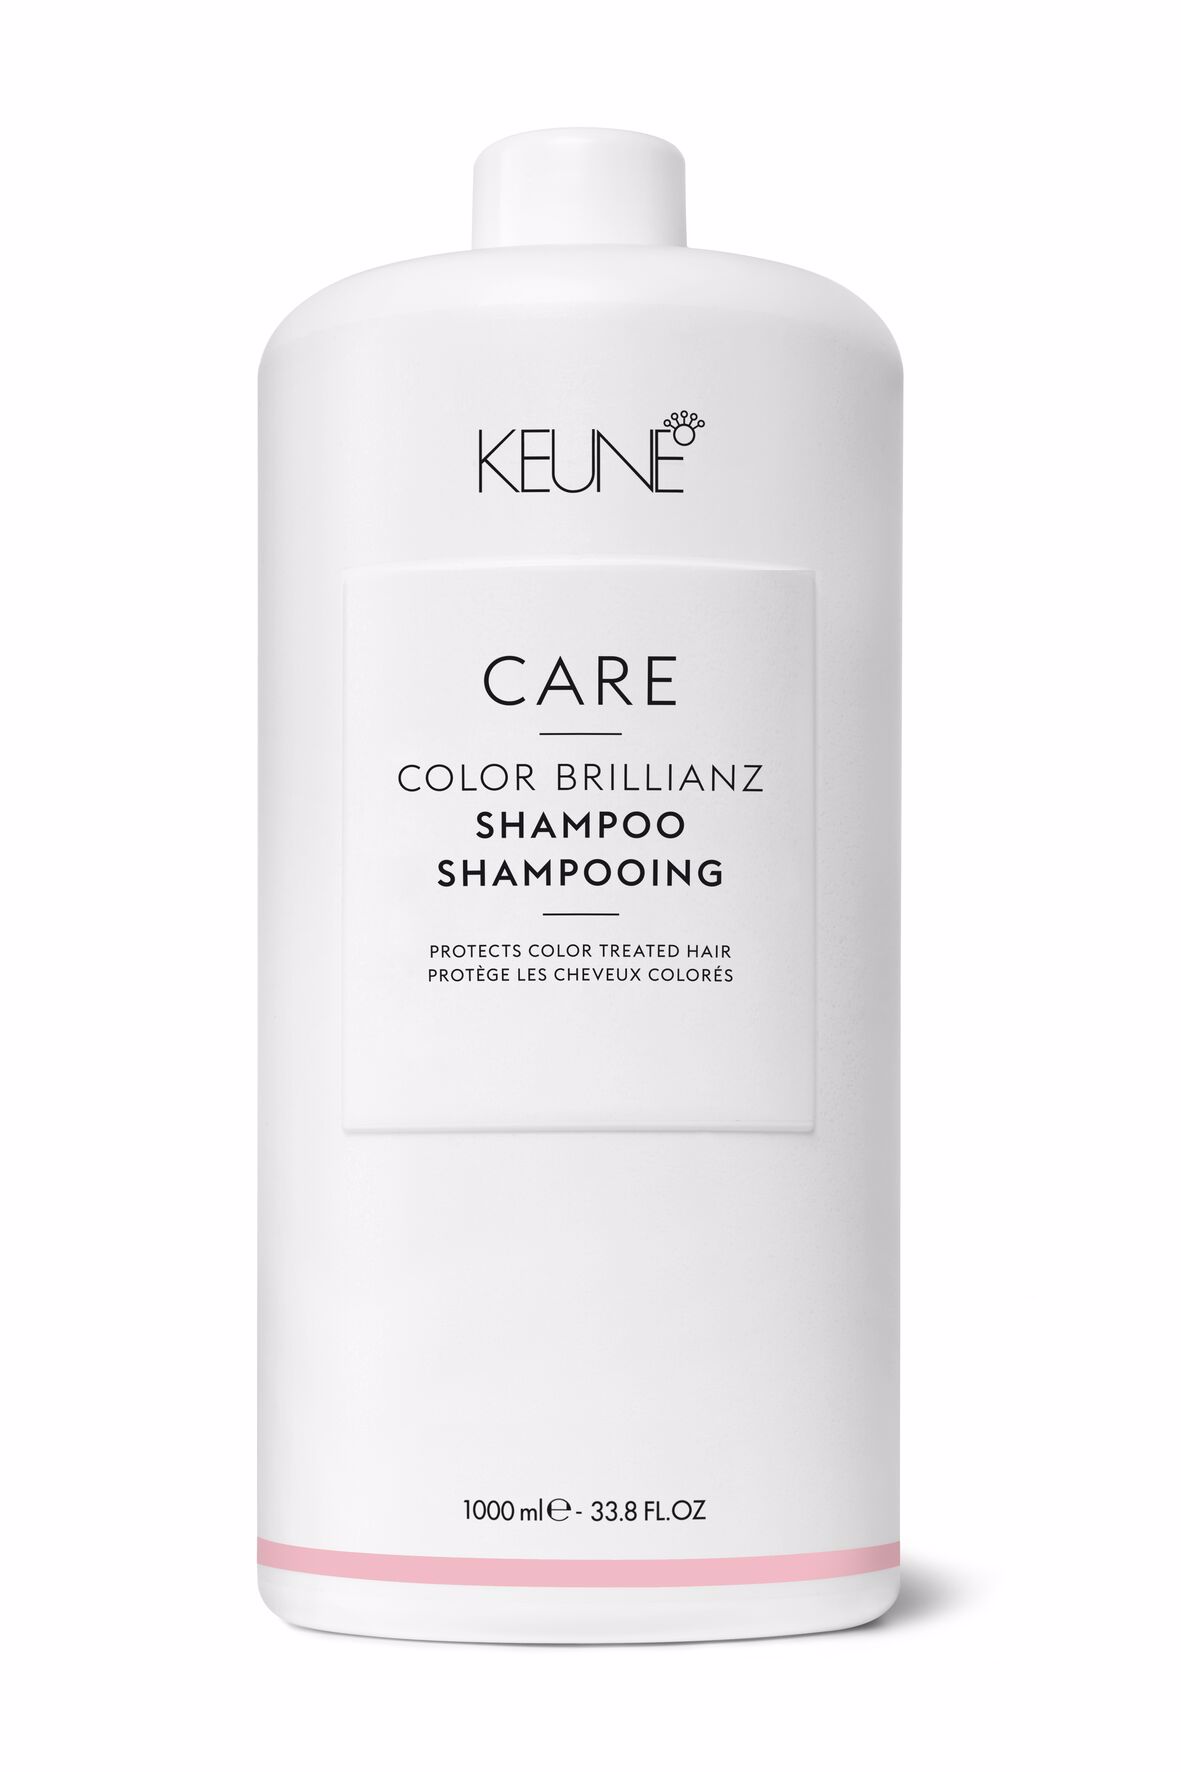 Color Brilliance Shampoo - your choice for lasting color intensity in colored hair. You can find more  wow hairproducts for colored hair on keune.ch.